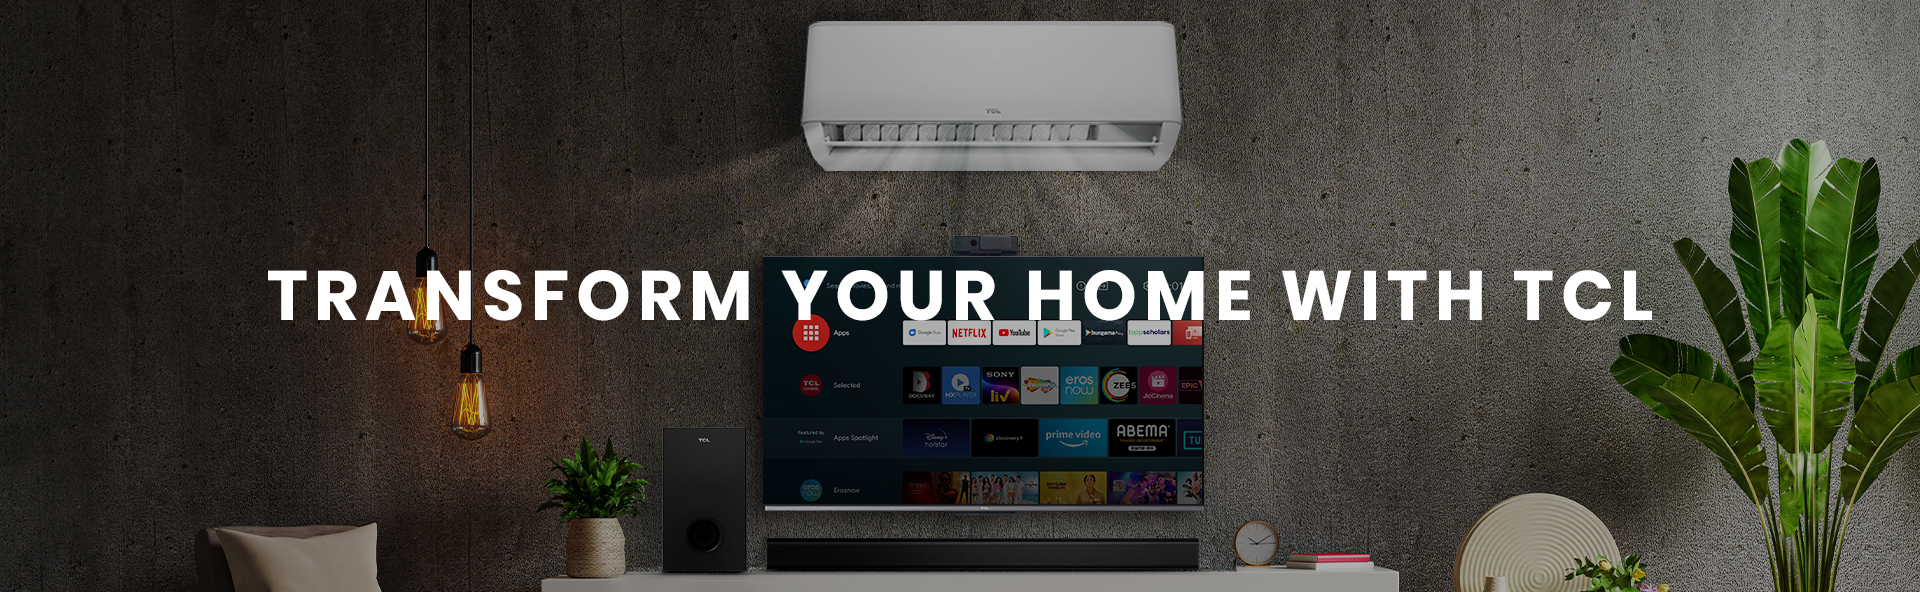 Transform Your Home With TCL